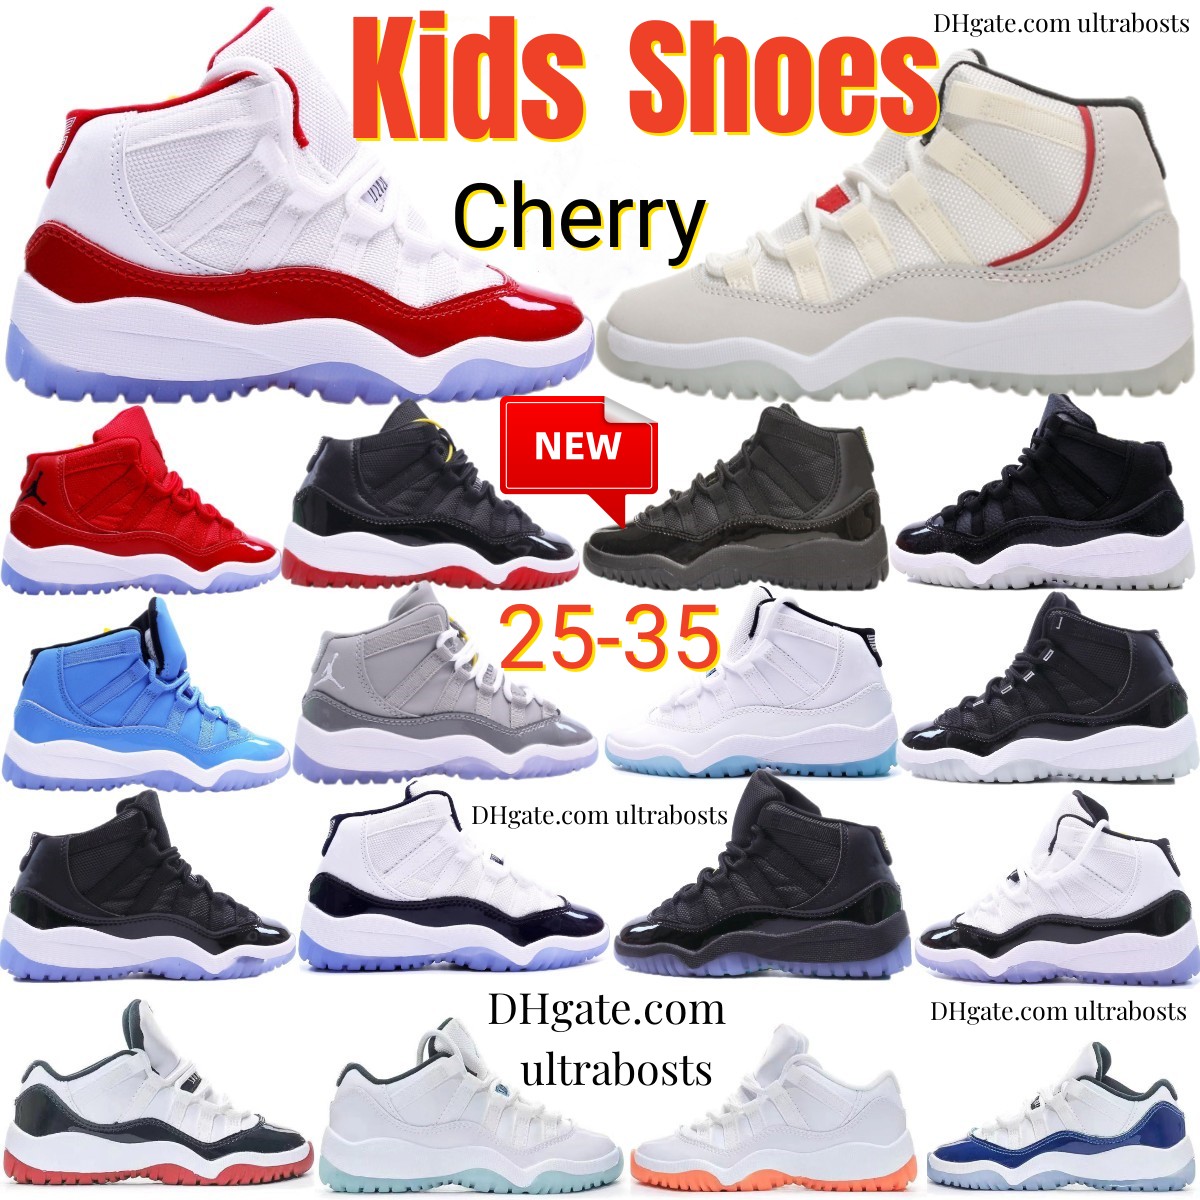 Kids Shoes 11s Cherry Basketball 11 Boys Sneakers Girls XI Children Running Bred Sport Trainers Toddler Youth Kid Outdoor Shoe Cool Grey Legend Blue Sneaker size 25-35